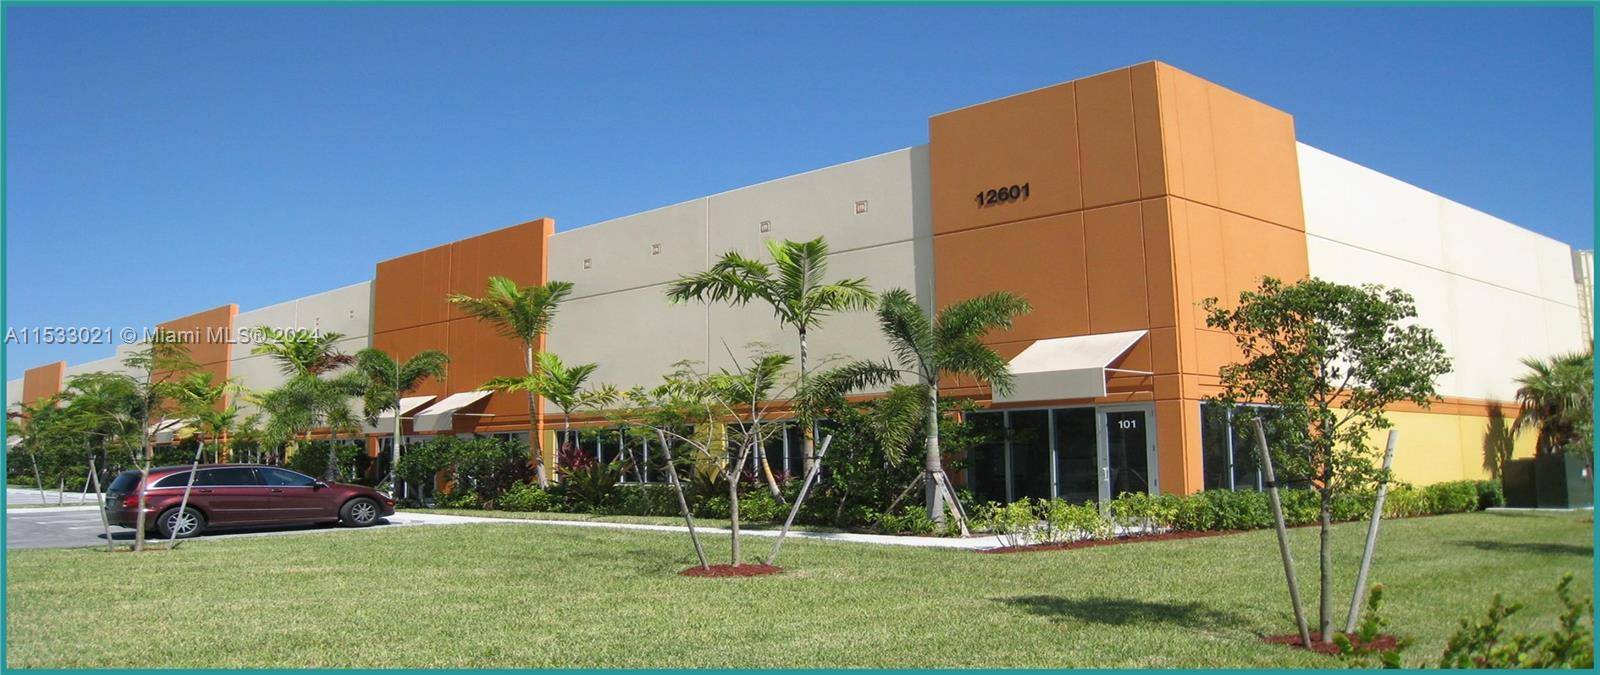 4, 875 Total SF Available For Lease, 3, 412 SF Warehouse Area, 488 SF Open Office Area on ground floor, 975 SF additional office in Mezzanine area Breakroom Conference Room ...